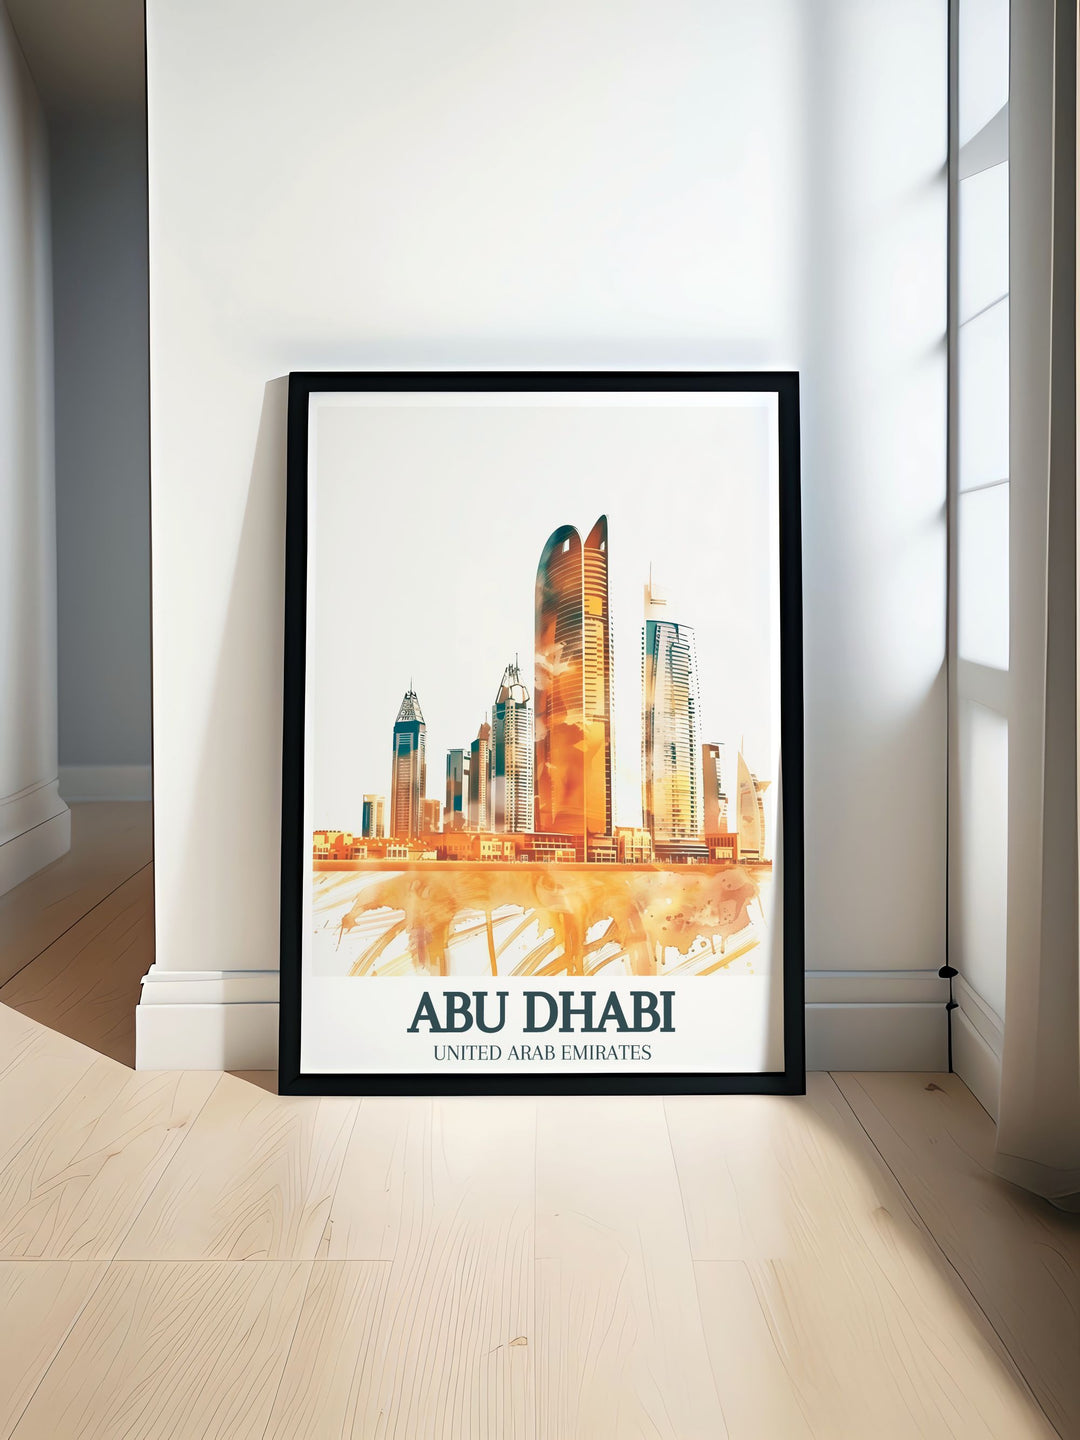 Stunning art print featuring the iconic Burj Mohammed Bin Rashid in Abu Dhabi. This Emirates poster captures the architectural brilliance of the tower and adds a touch of elegance to any space. Perfect for fans of modern architecture and United Emirates decor.